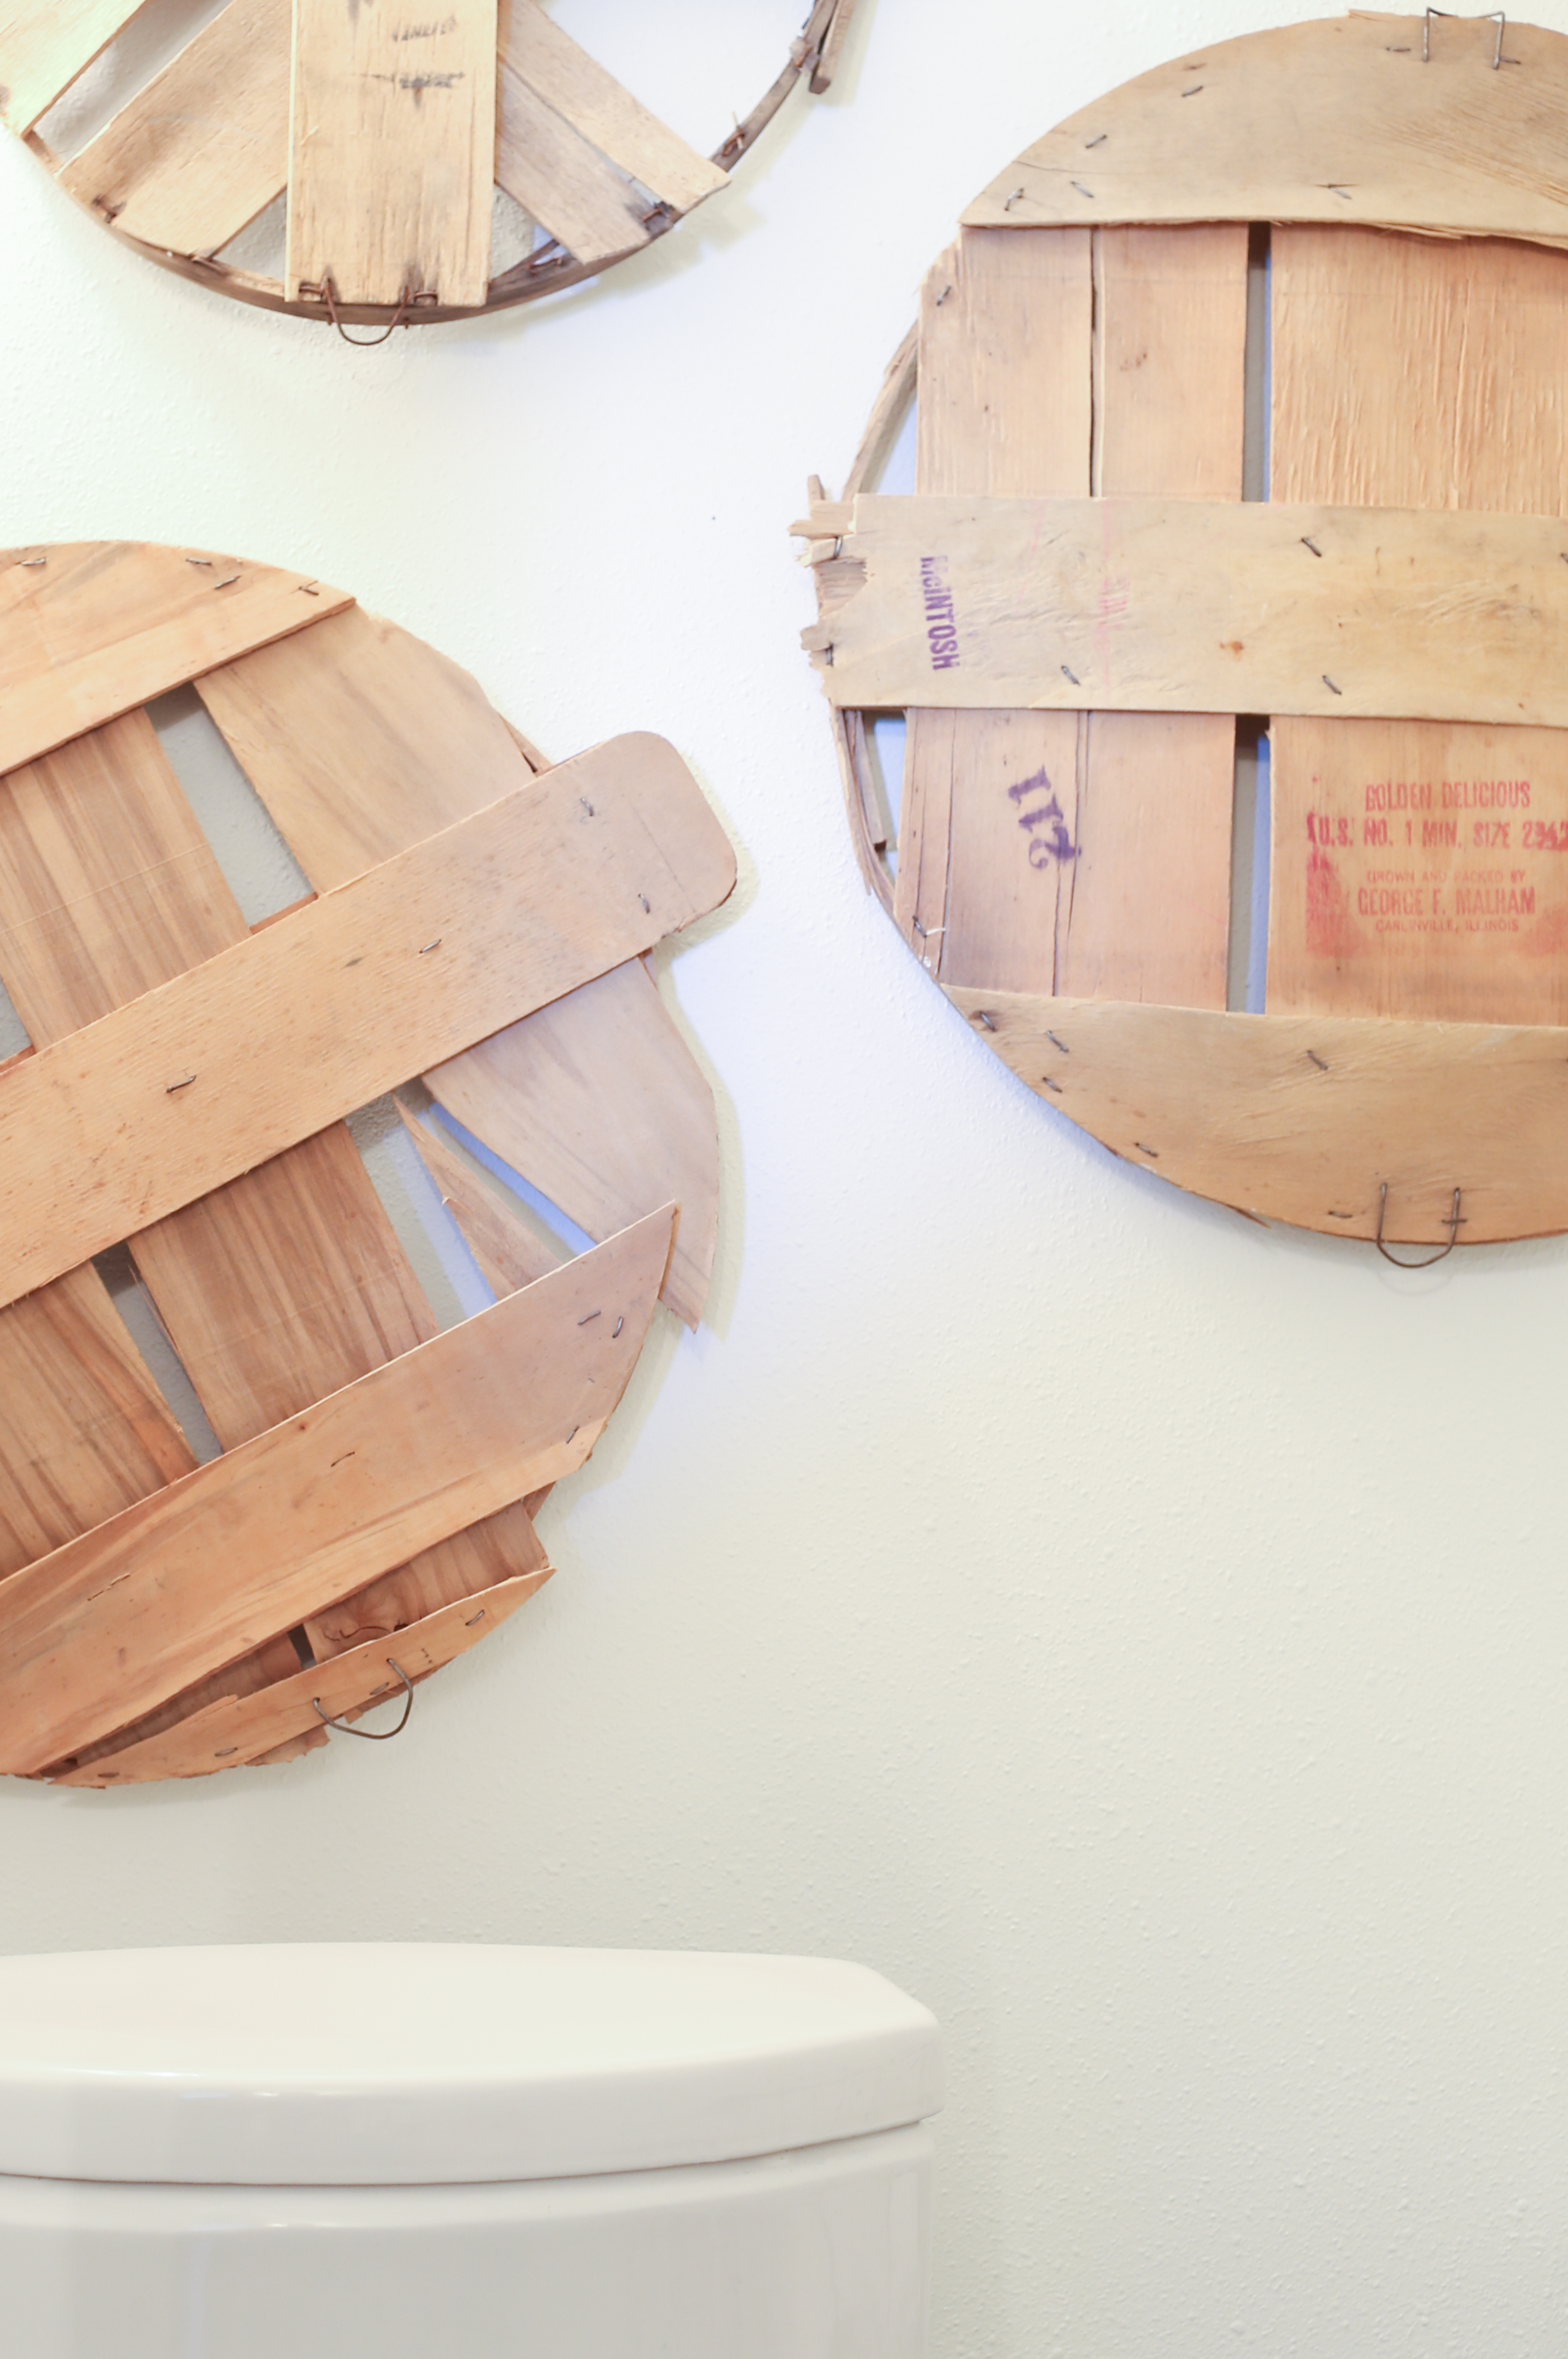 Apple barrel lids give texture and dimension to the wall and bring in the farmhouse look.